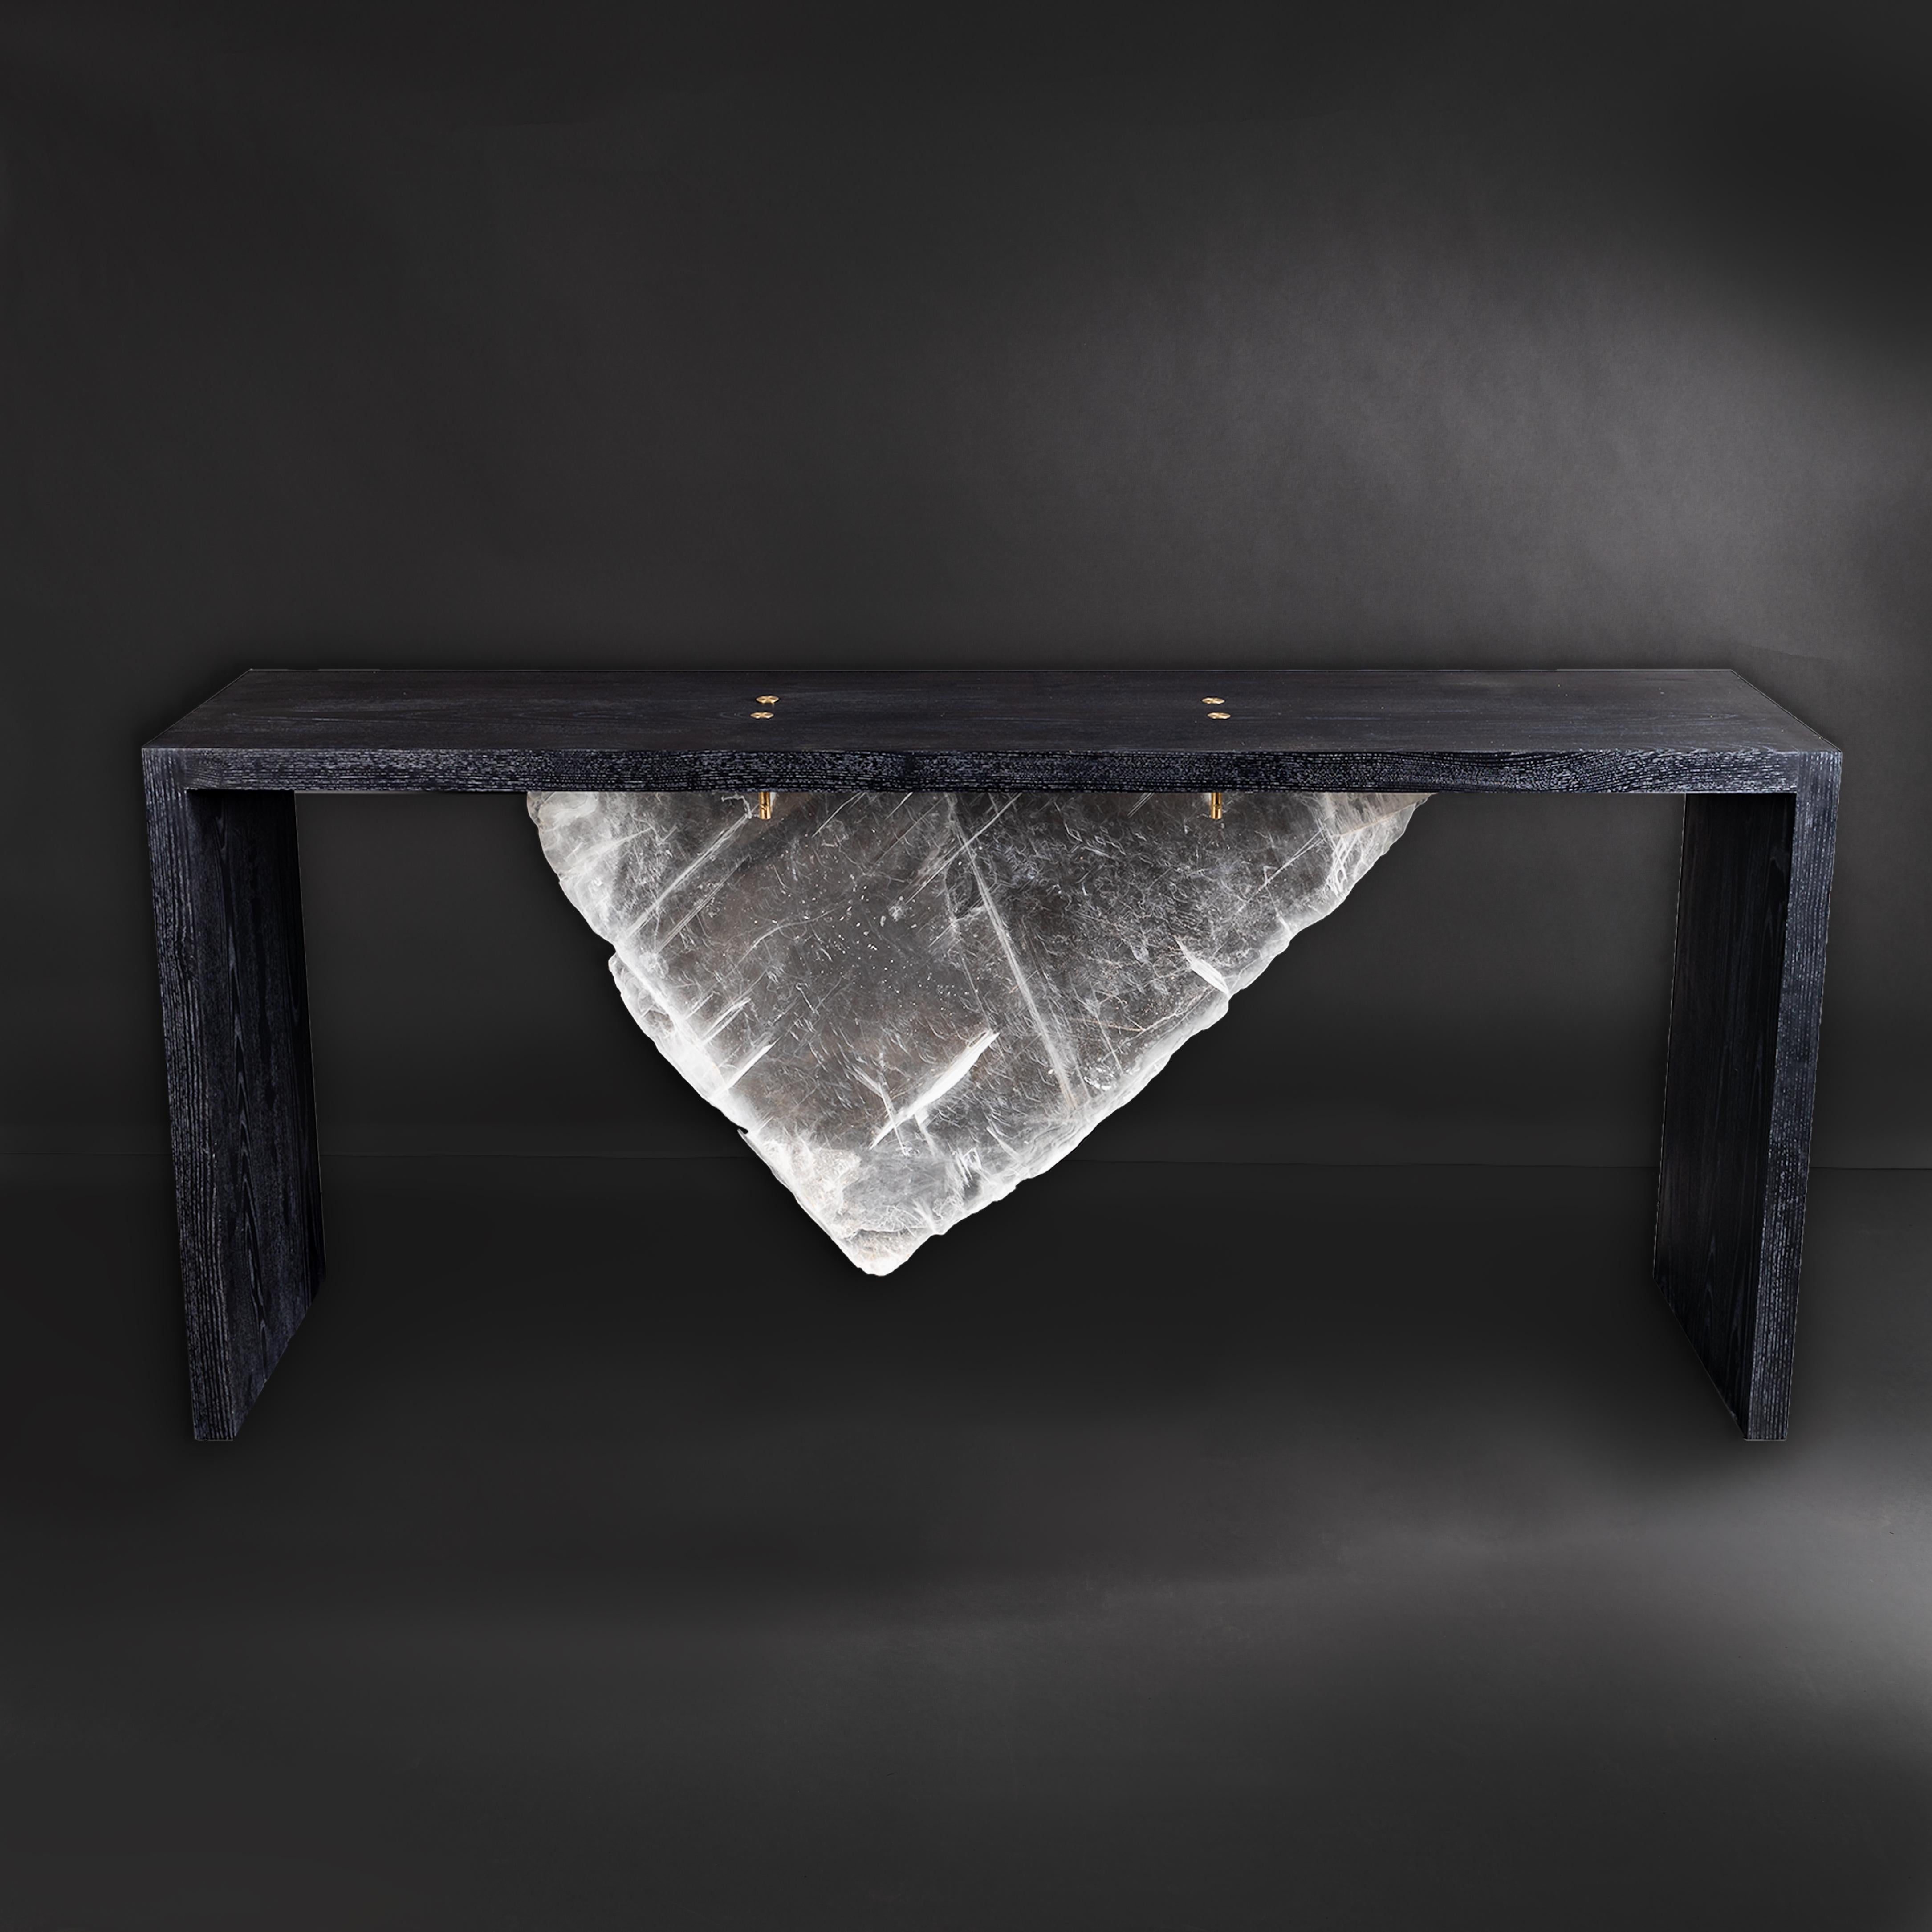 Original design, console of American solid ash inked wood with a natural clear selenite slab.